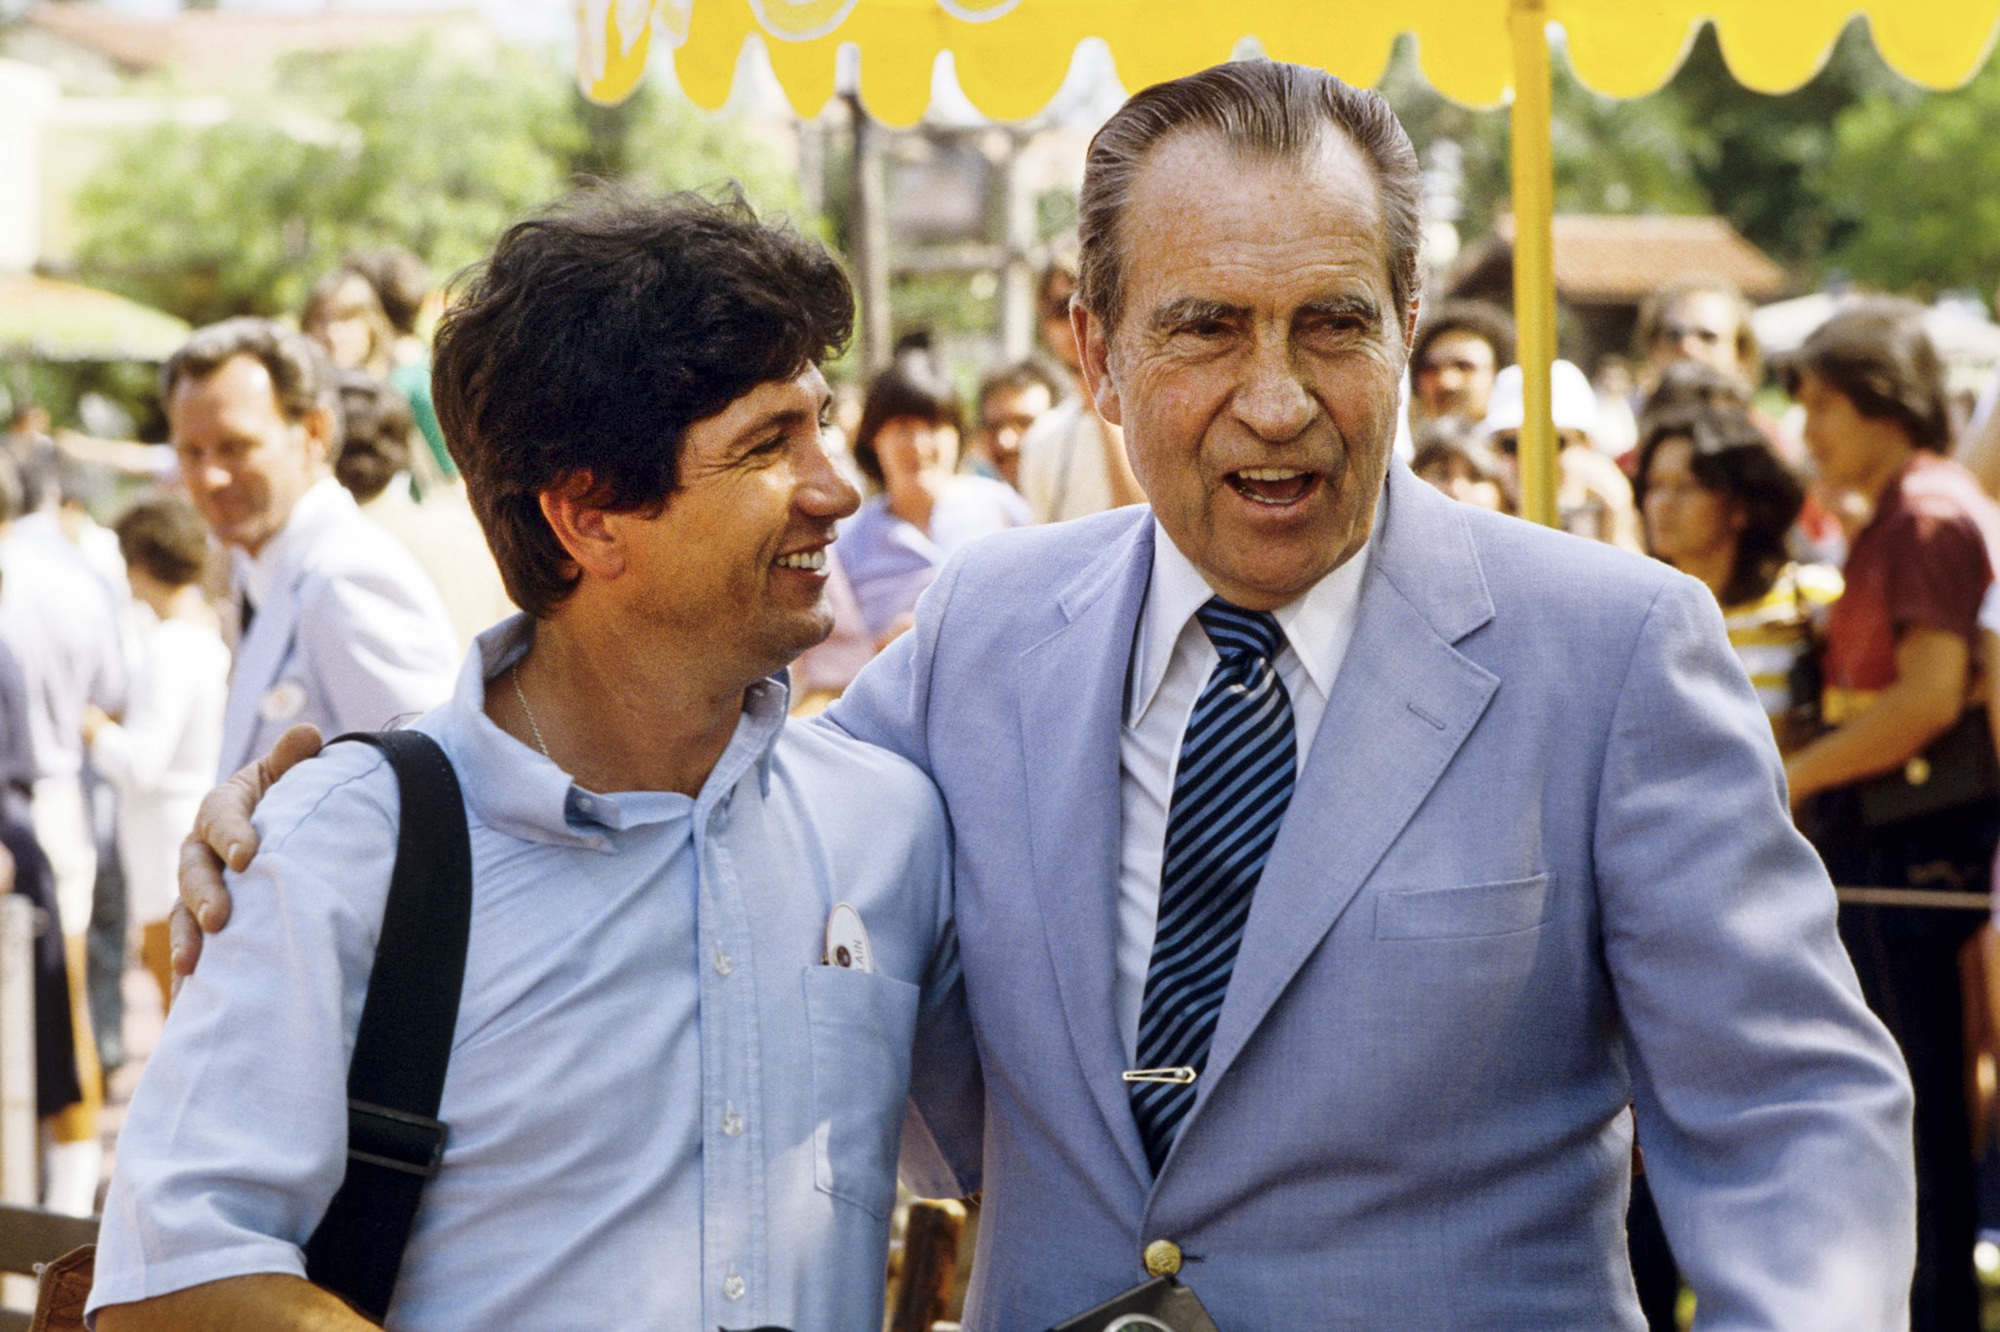 During his career as a photographer at Disney, Alain Boniec, left, had the opportunity to photograph a variety of celebrities and politicians, including former President Richard Nixon.